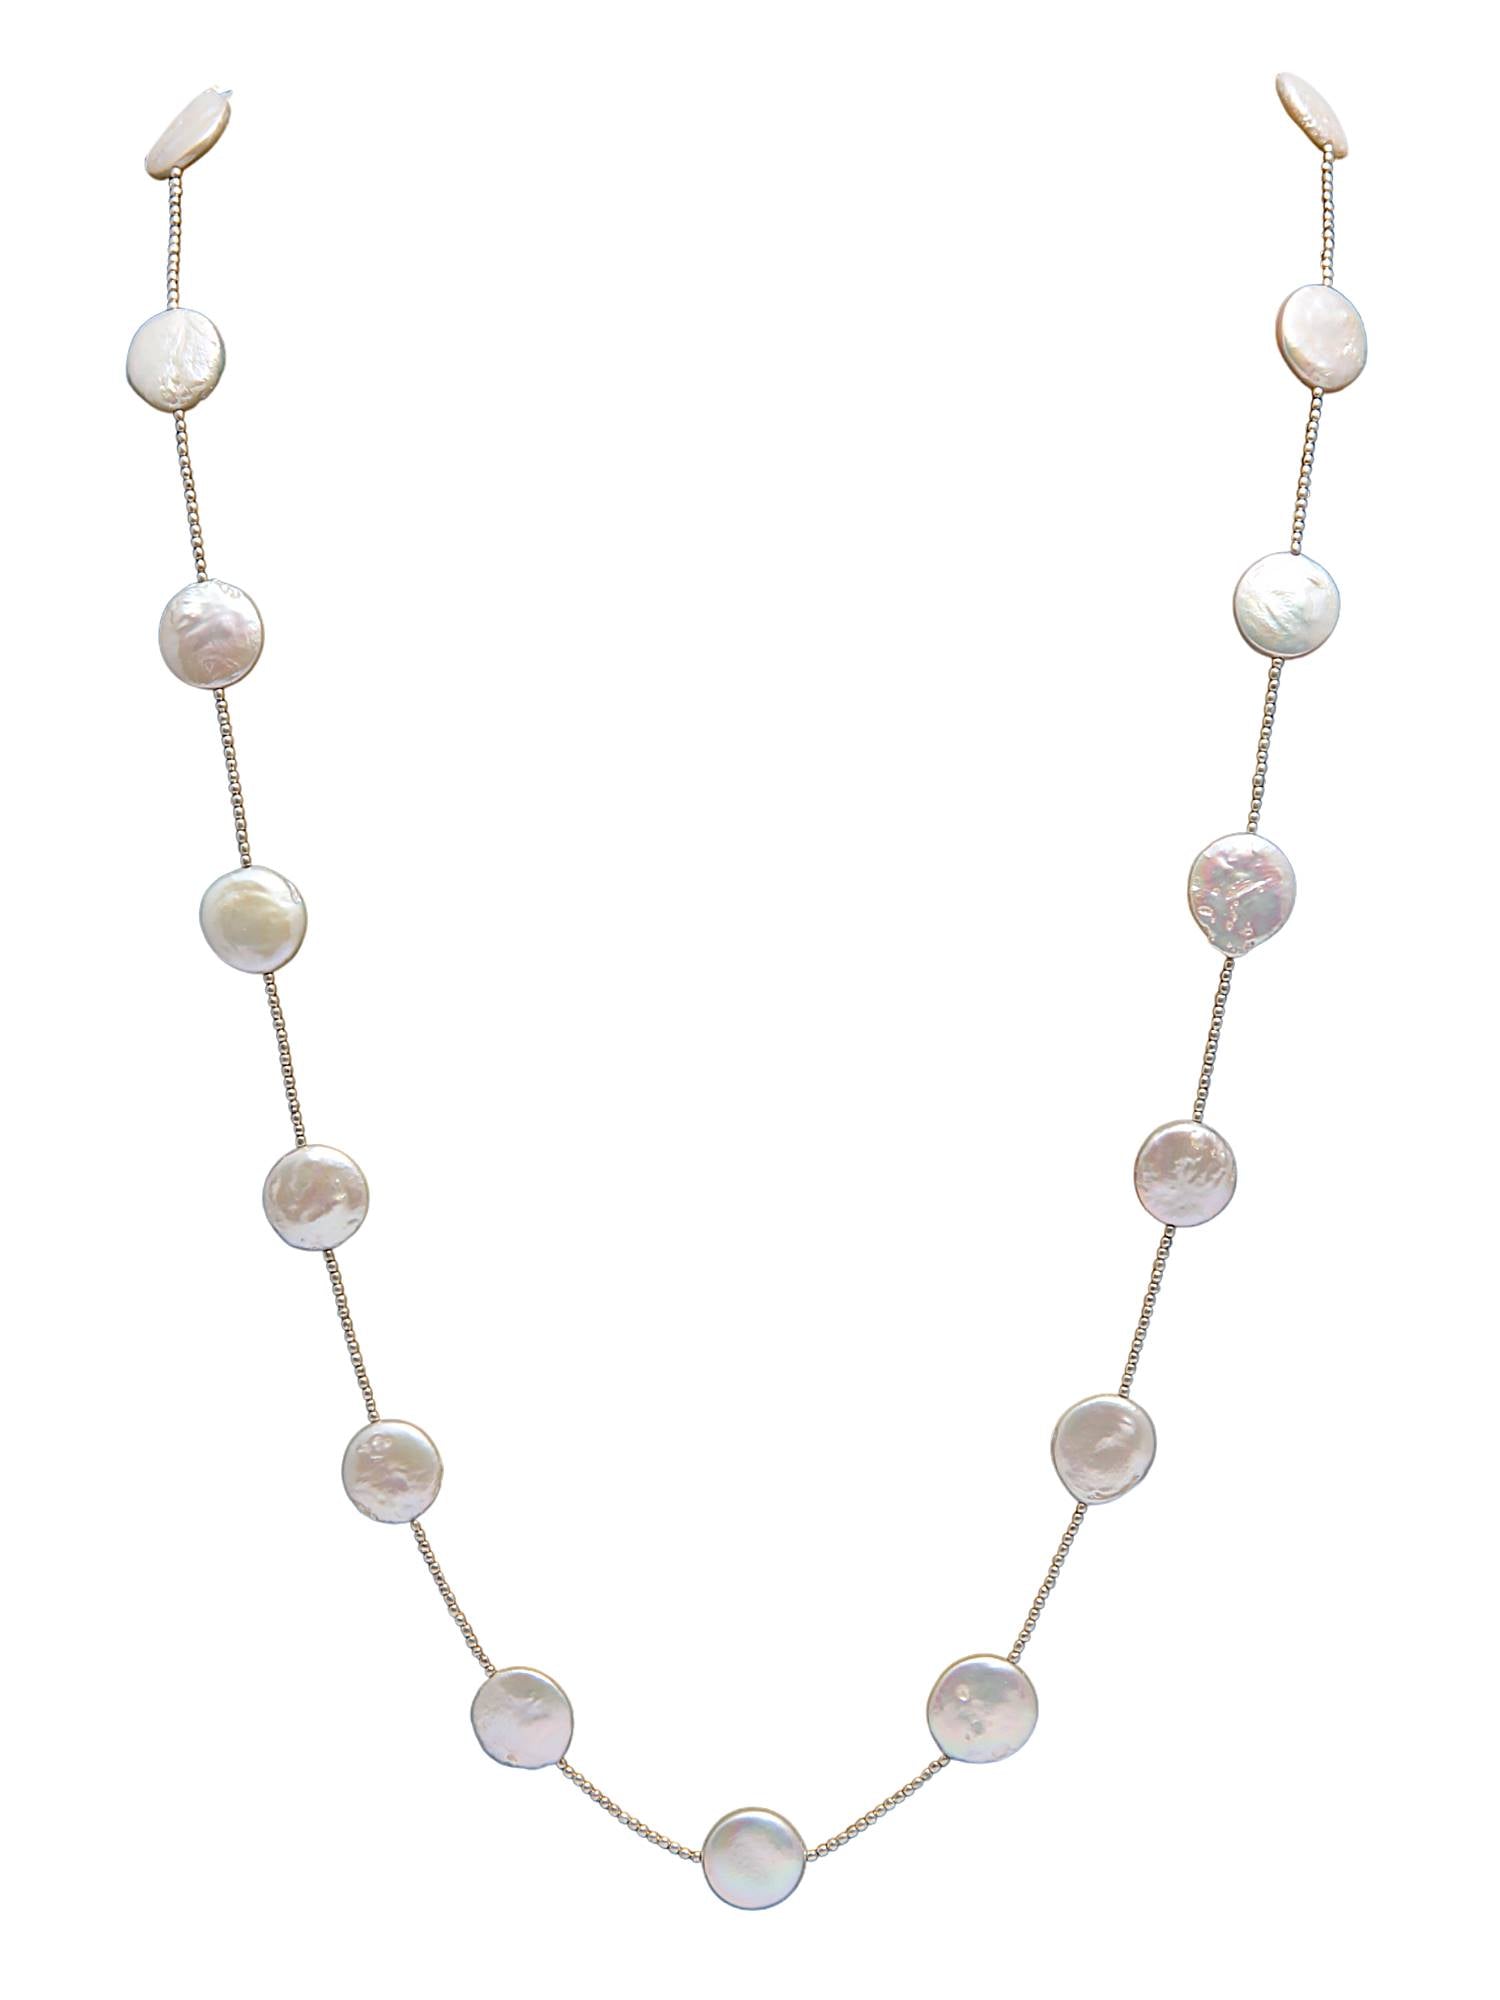 Baroque Flat Rounded White with Silver 1MM Bead Balls Long Chain - (F1020)